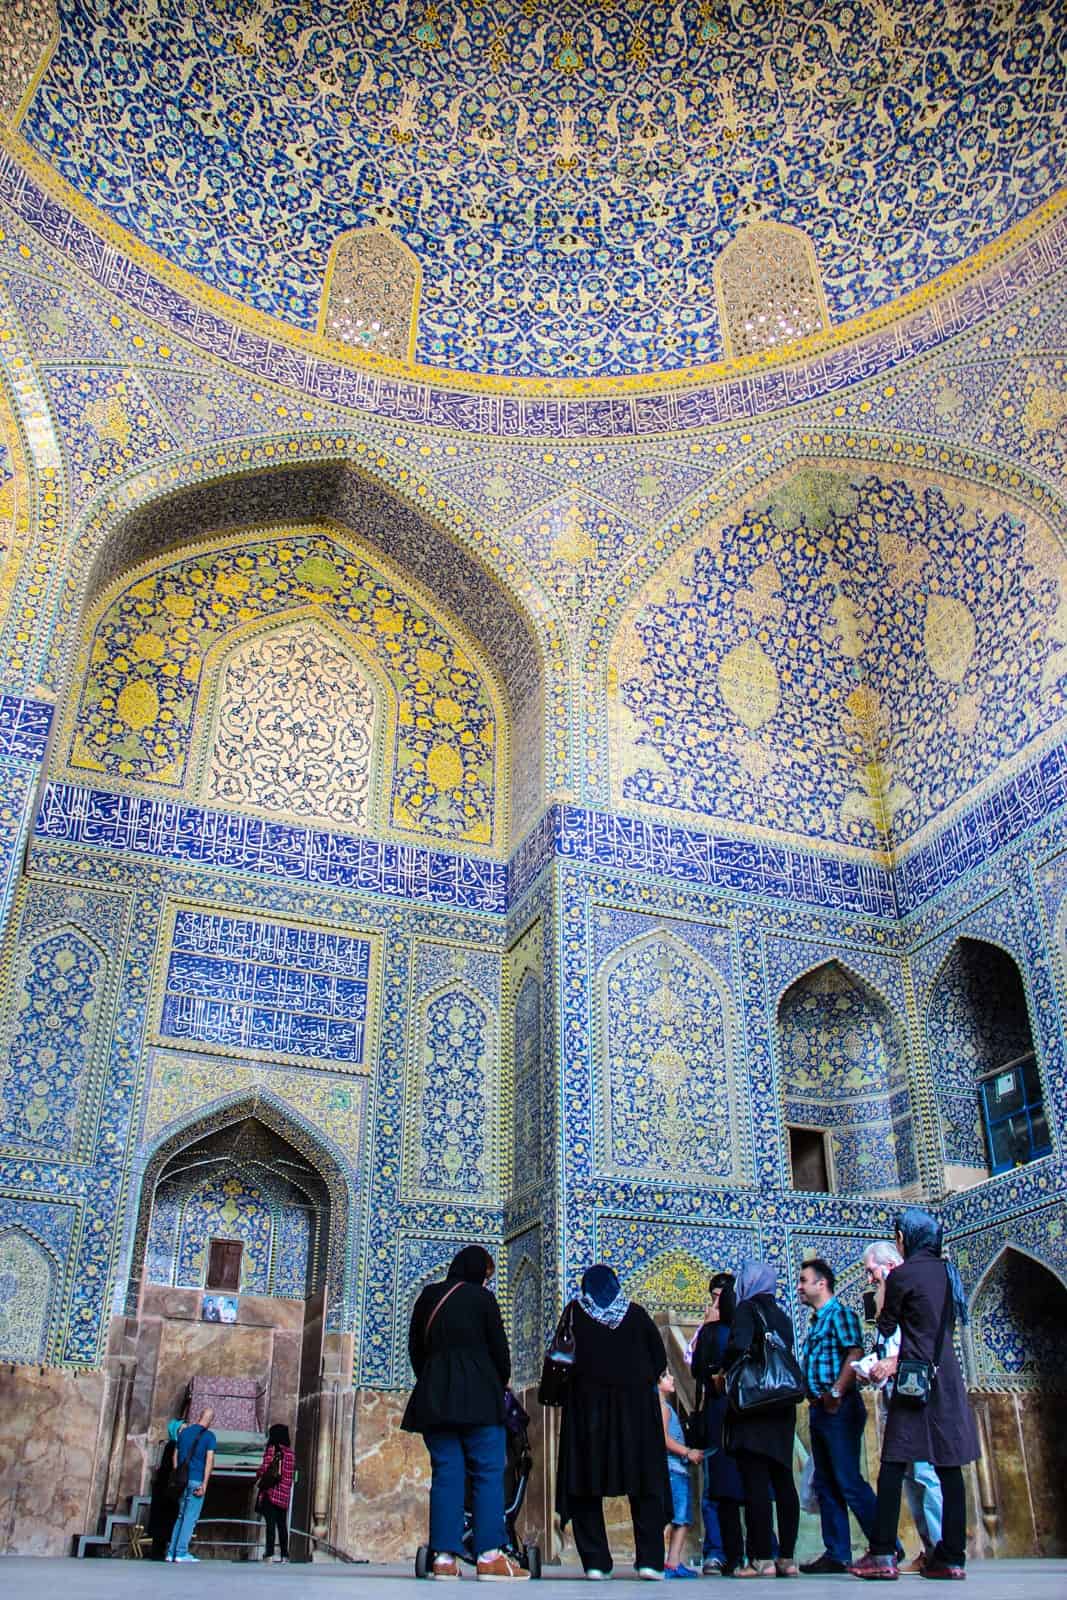 Travellers enter a mosque in Iran covered in gold and blue tiles